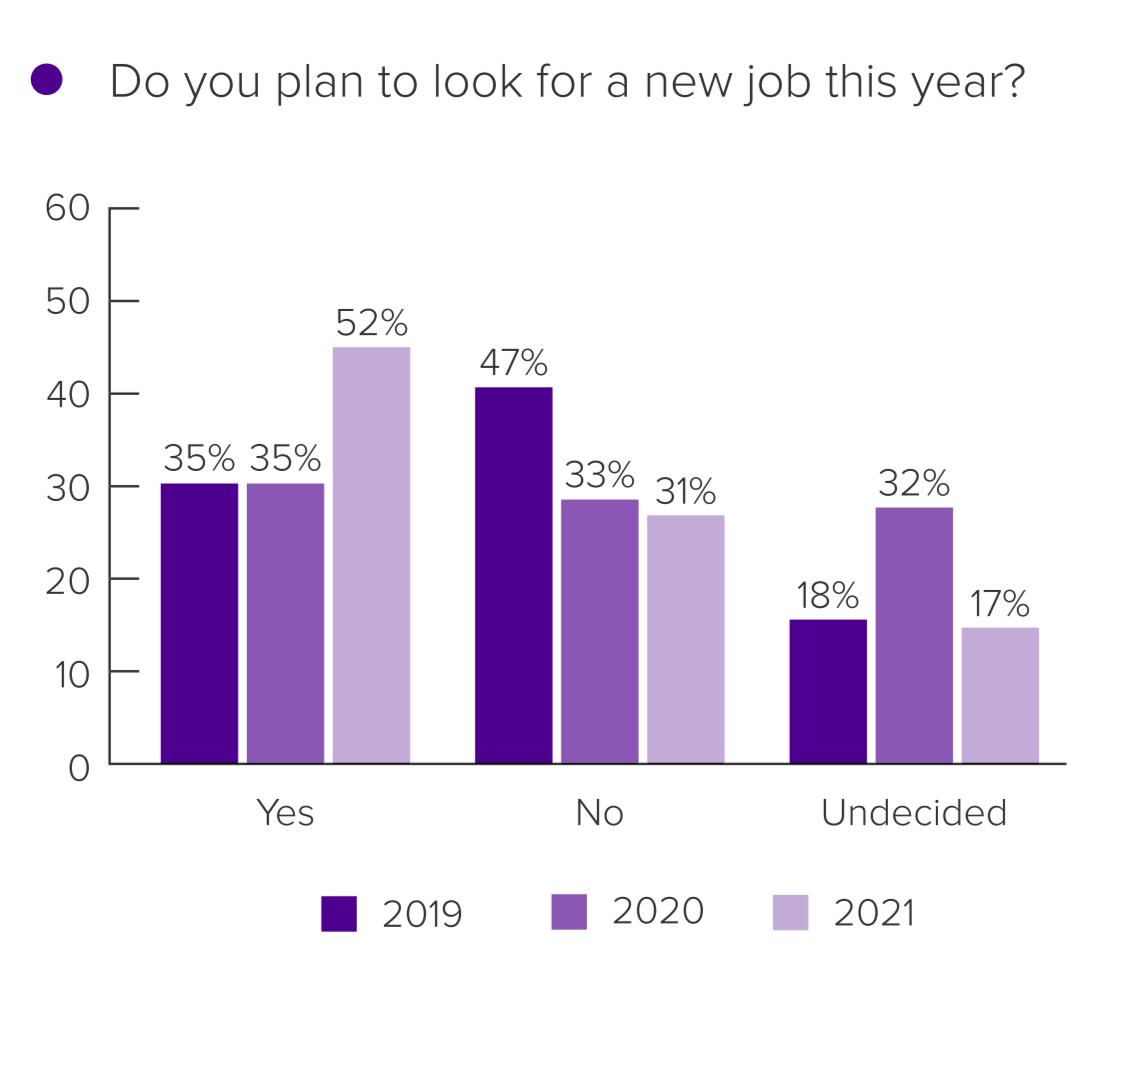 52% of Employees looking for a new job in 2021